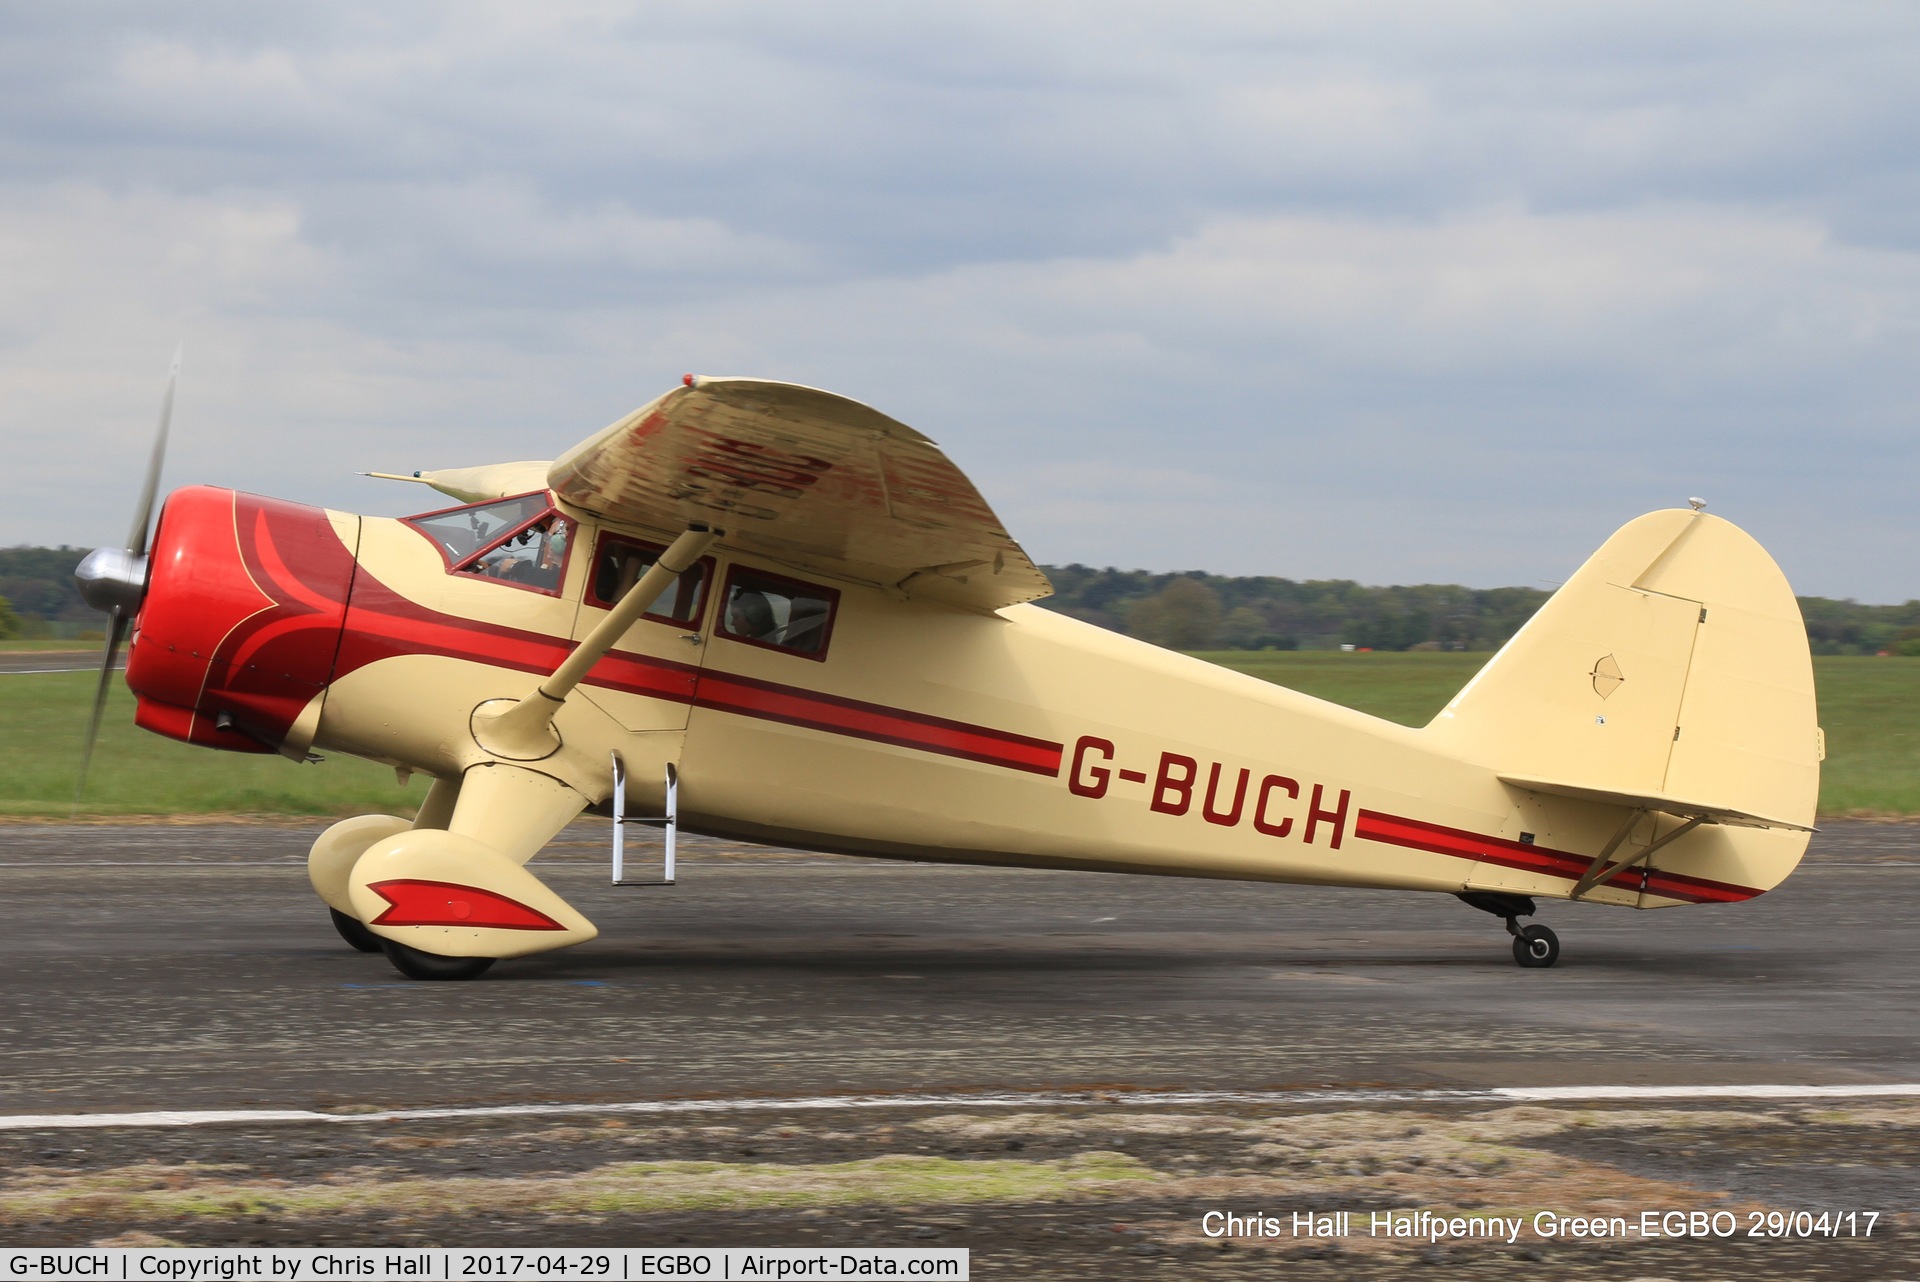 G-BUCH, 1943 Stinson V77 (AT-19) Reliant C/N 77-381, at the Radial & Trainer fly-in